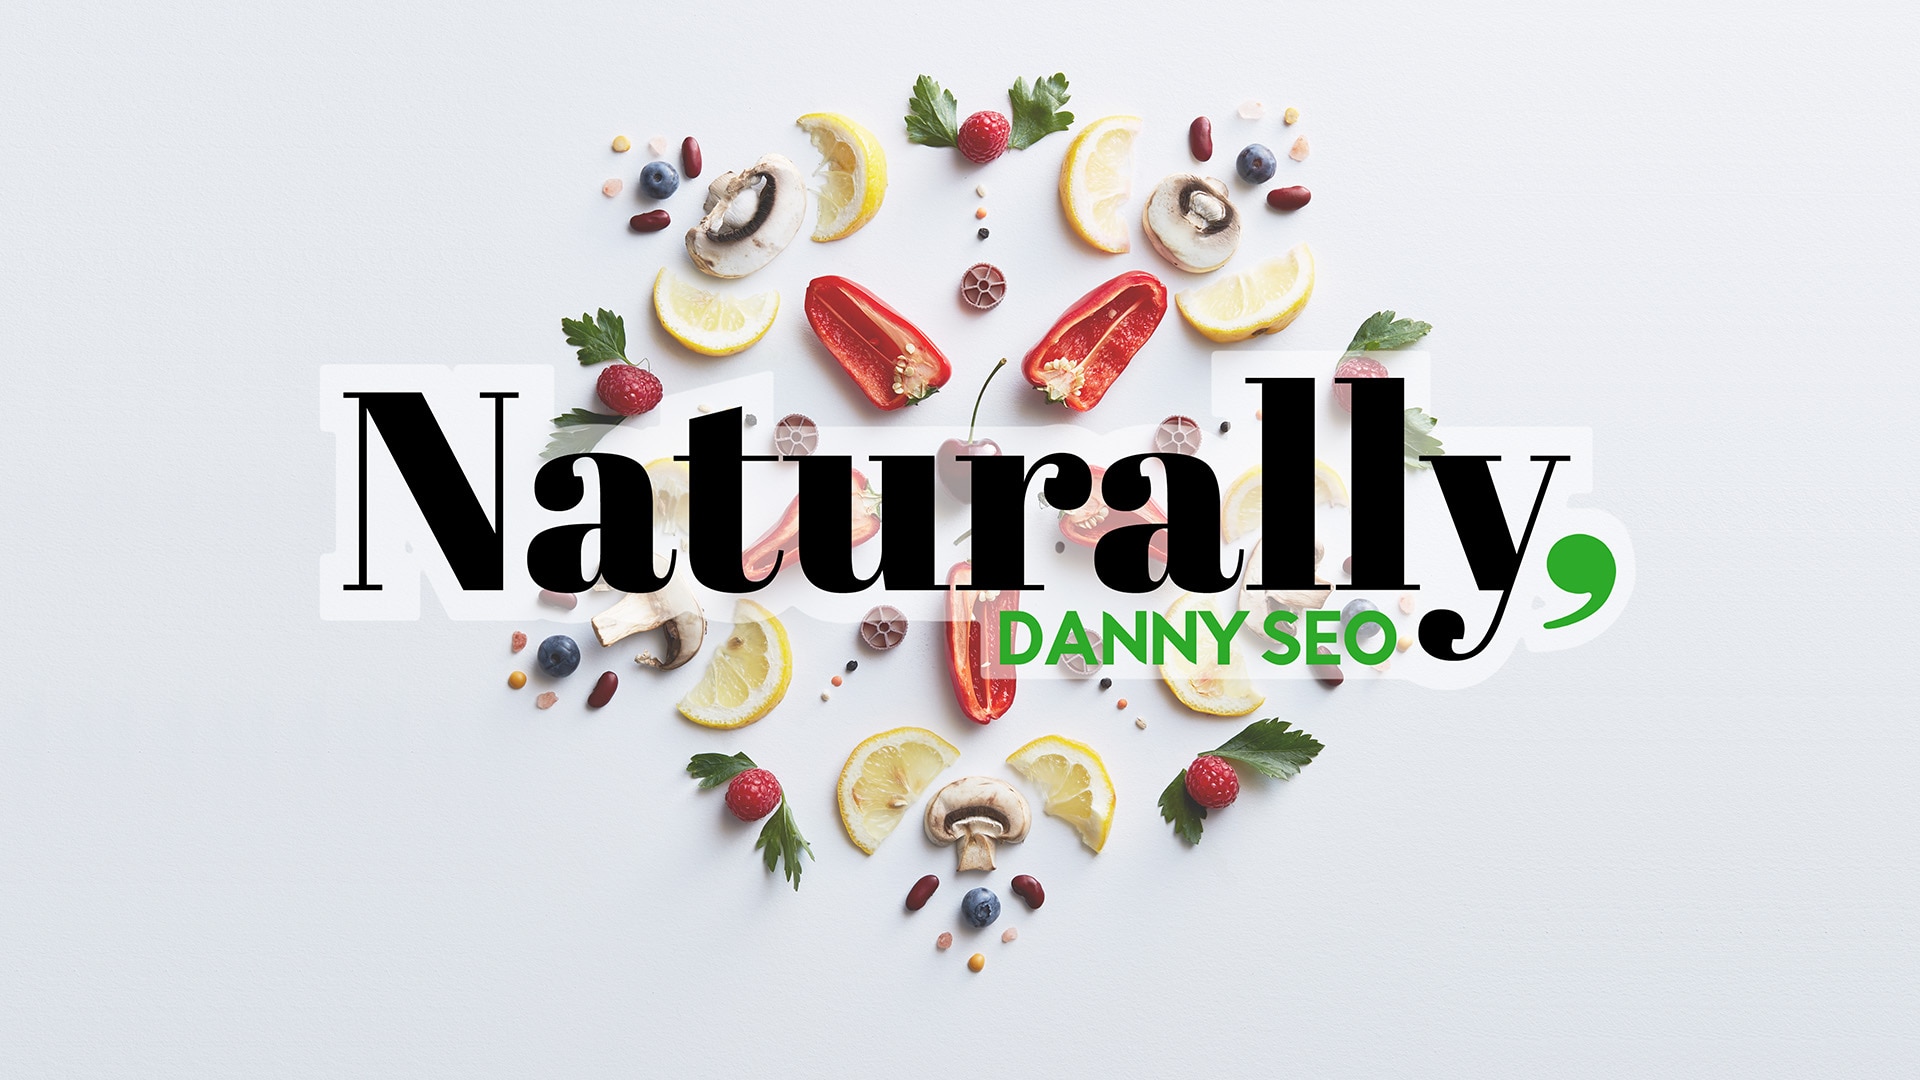 6. "Nail Art Hacks from Danny Seo's Green Beauty Routine" - wide 4